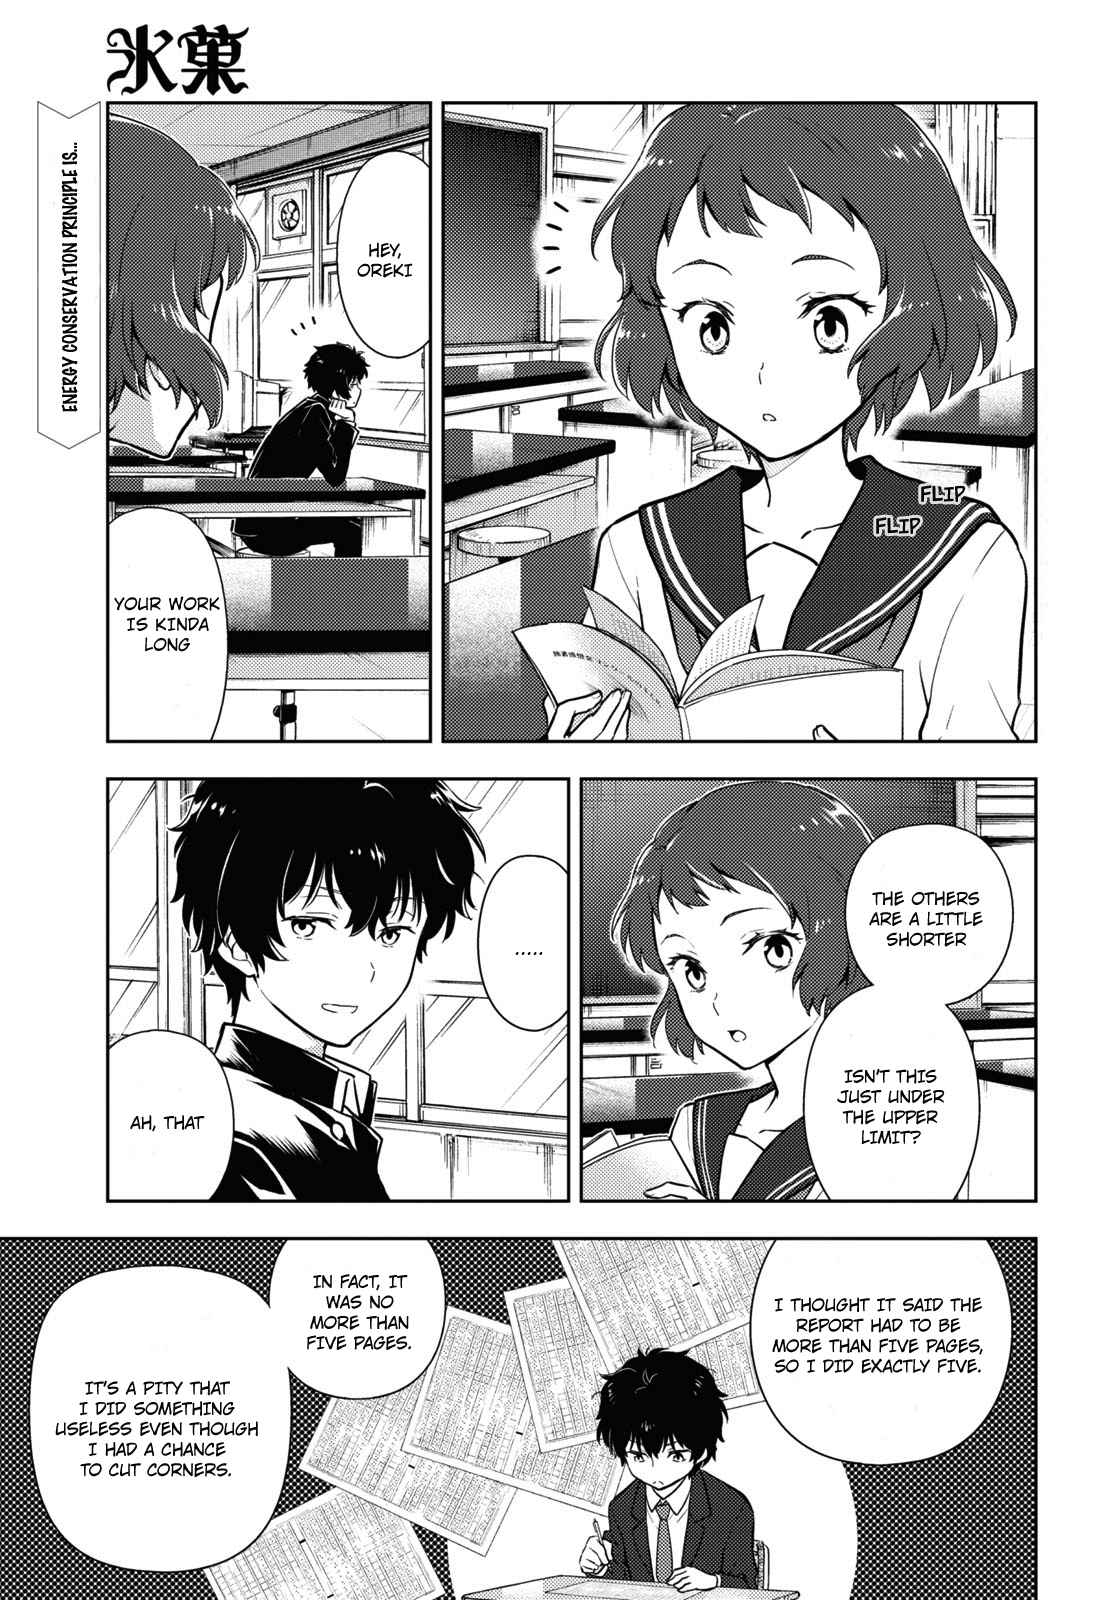 Hyouka 92 Our Legendary Volume ④